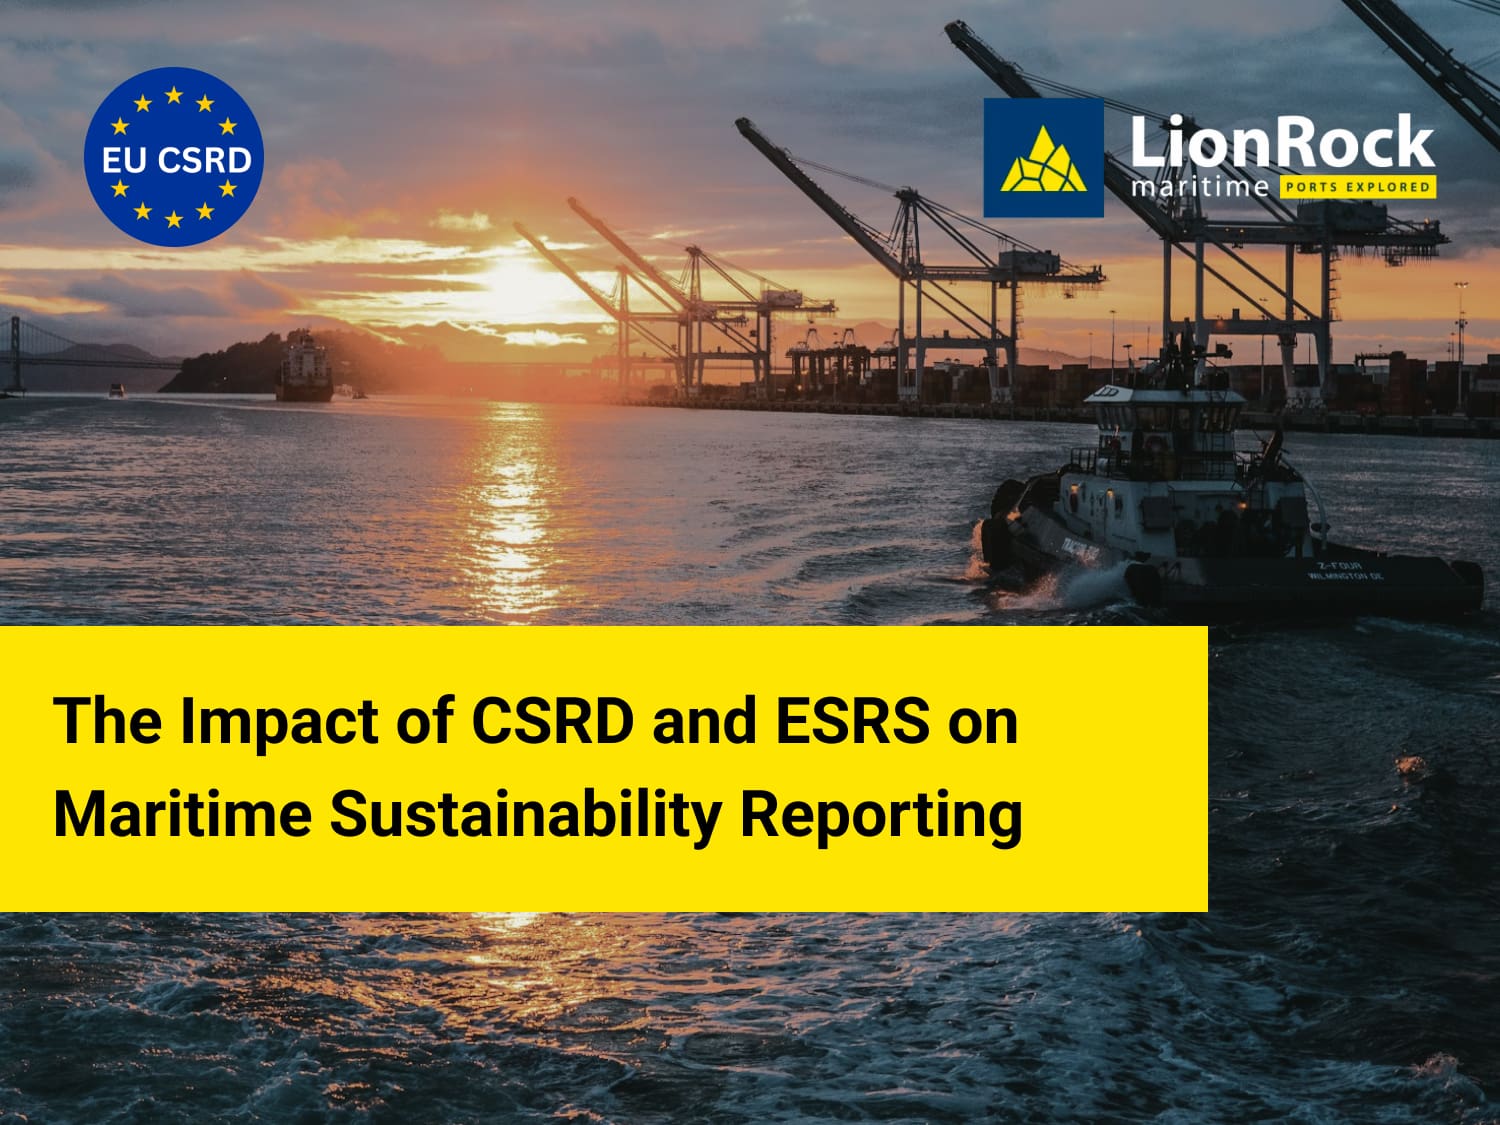 The Impact of CSRD and ESRS on Maritime Sustainability Reporting